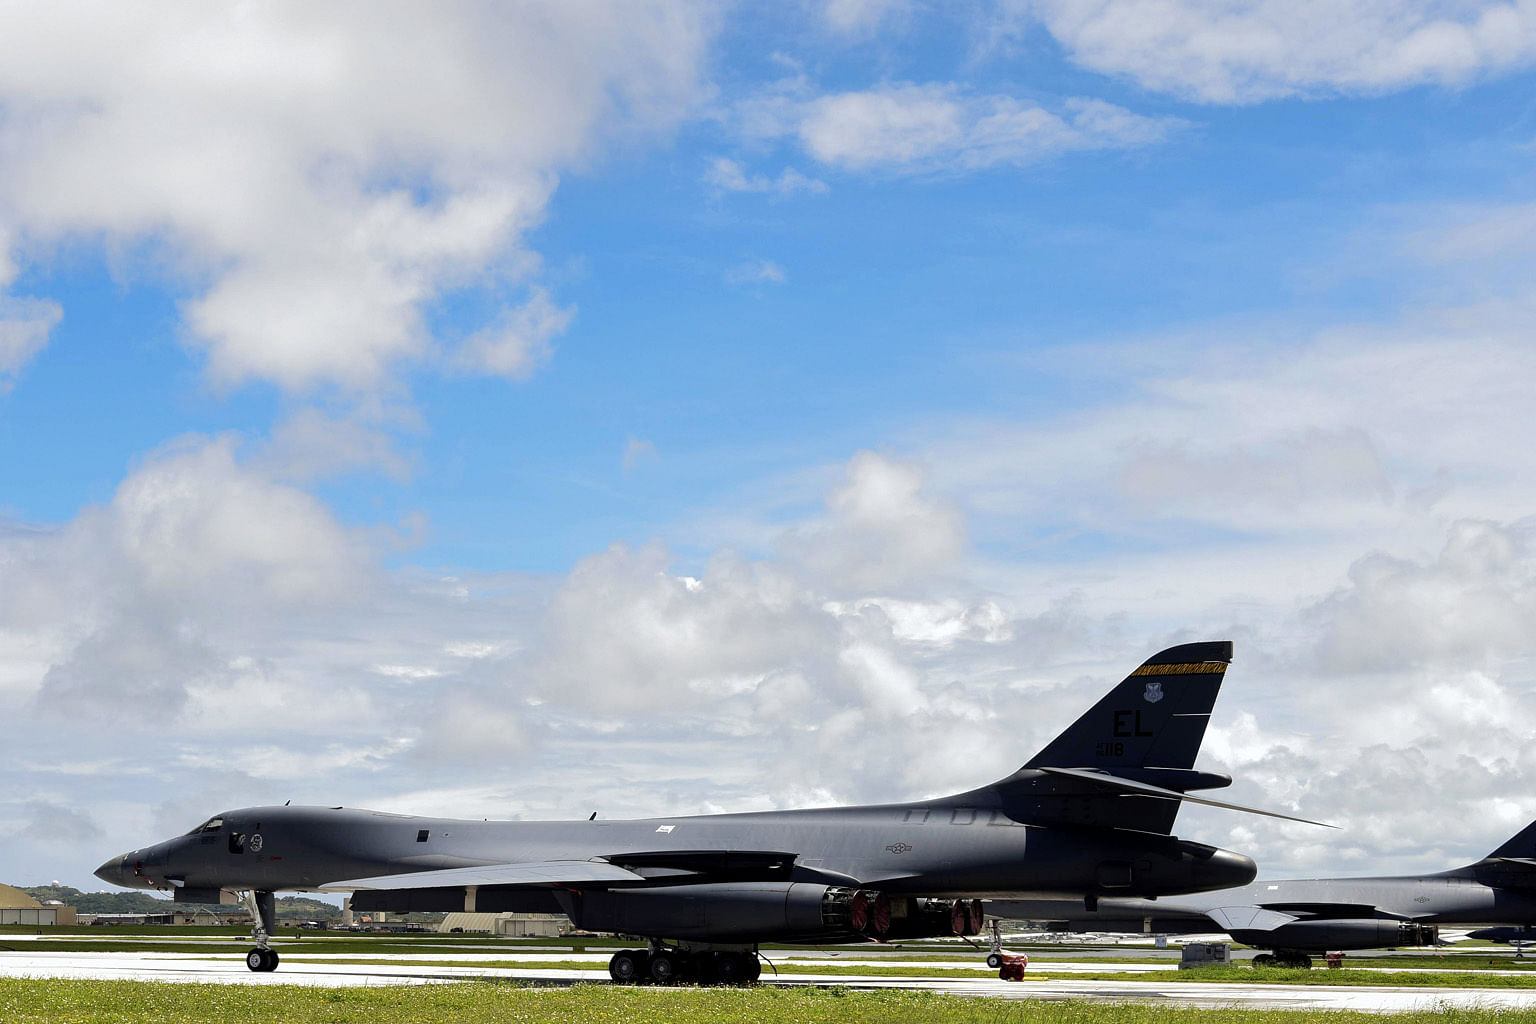 B-1B strategic bombers at Andersen Air Force Base near Yigo, Guam, on Thursday. Experts warned that joint US-South Korea military exercises later this month could raise the risk of miscommunication and accidents.